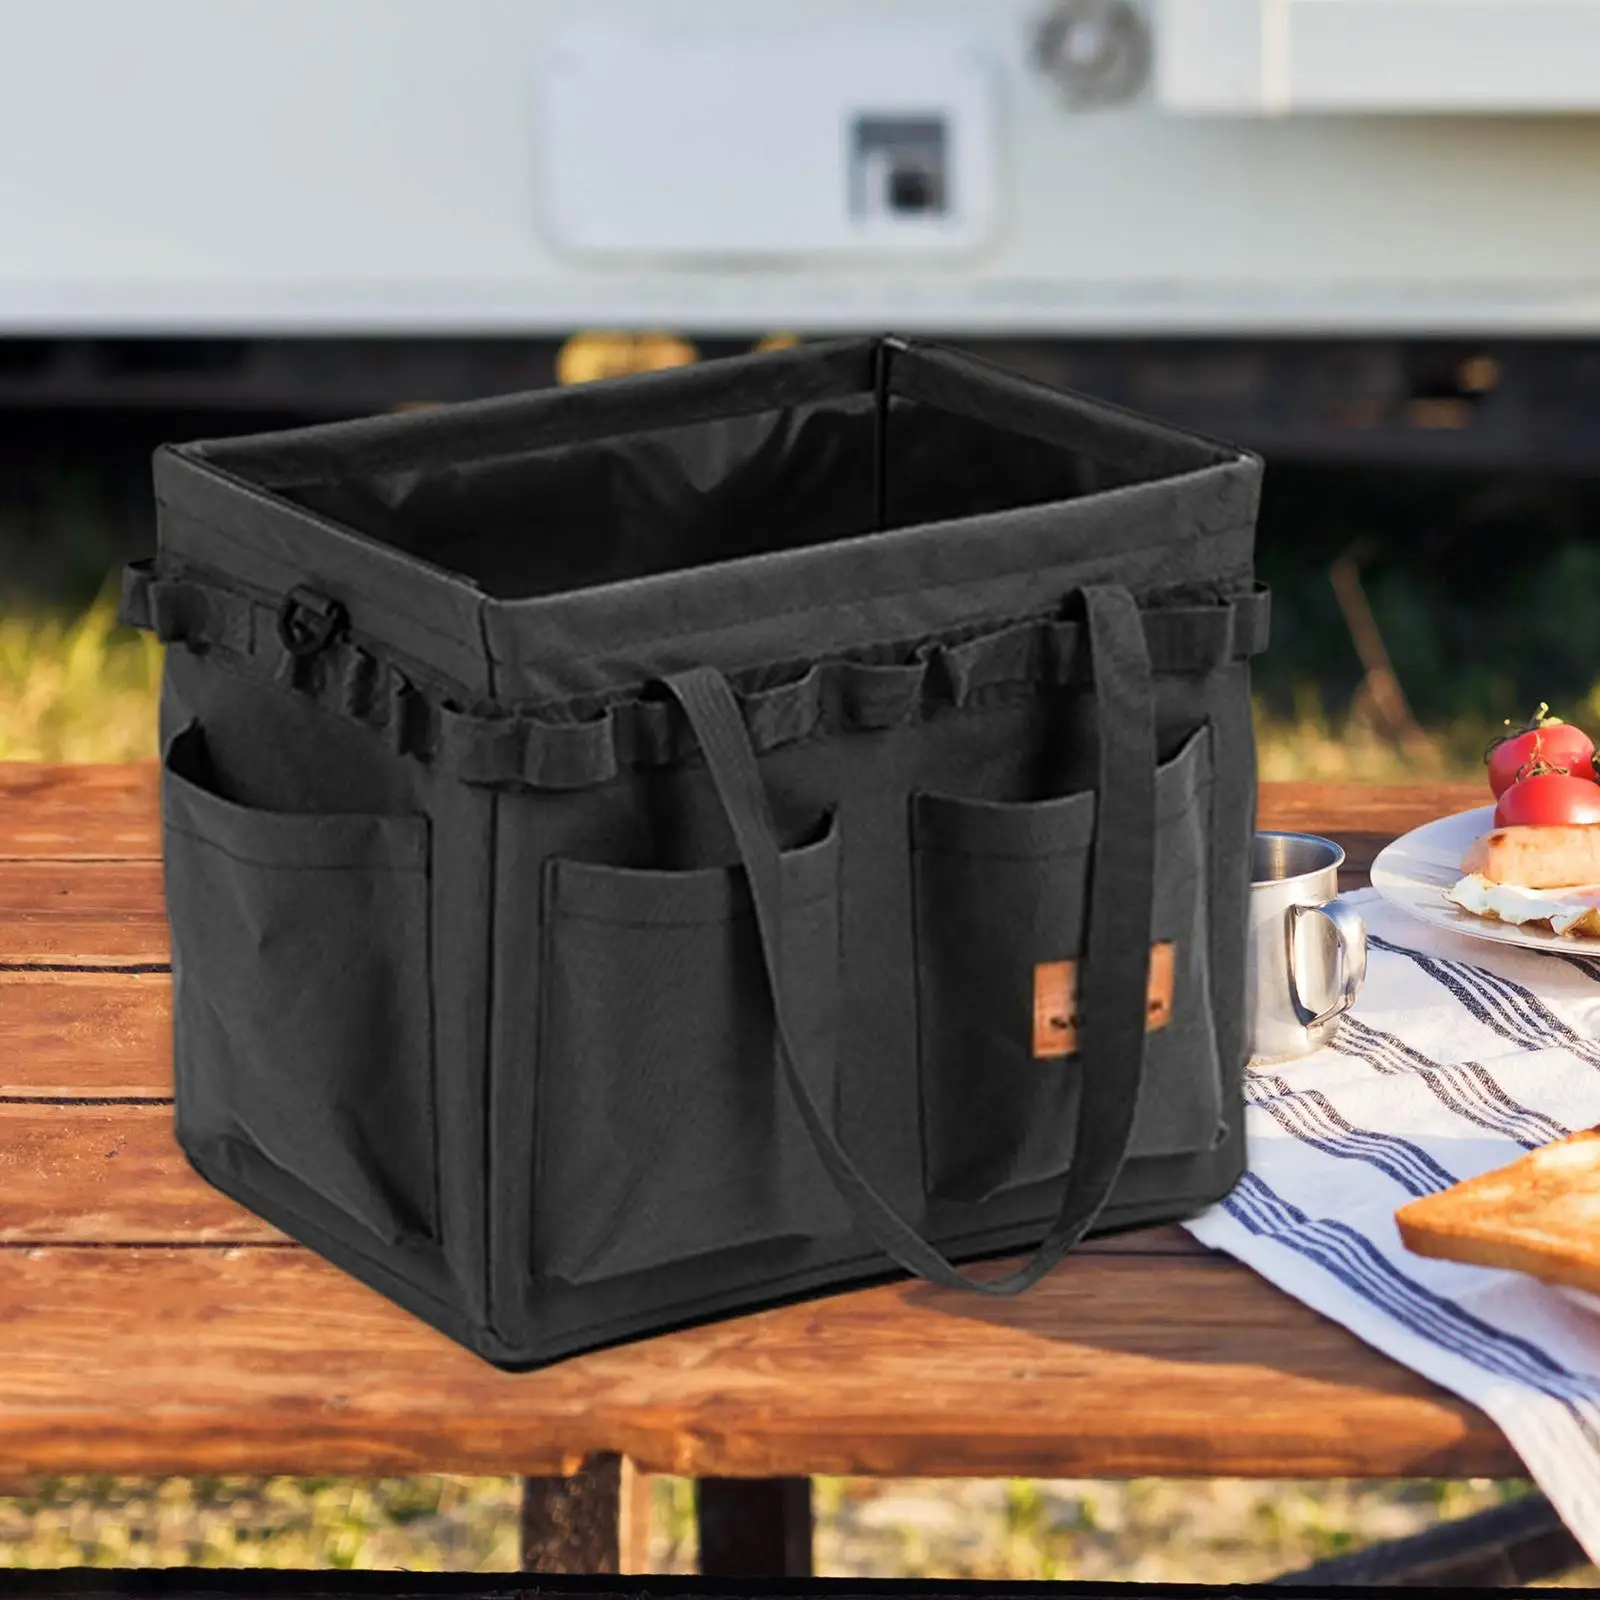 Utility Tote Tool Organizer Container Case Beach Picnic Camping Storage Bag